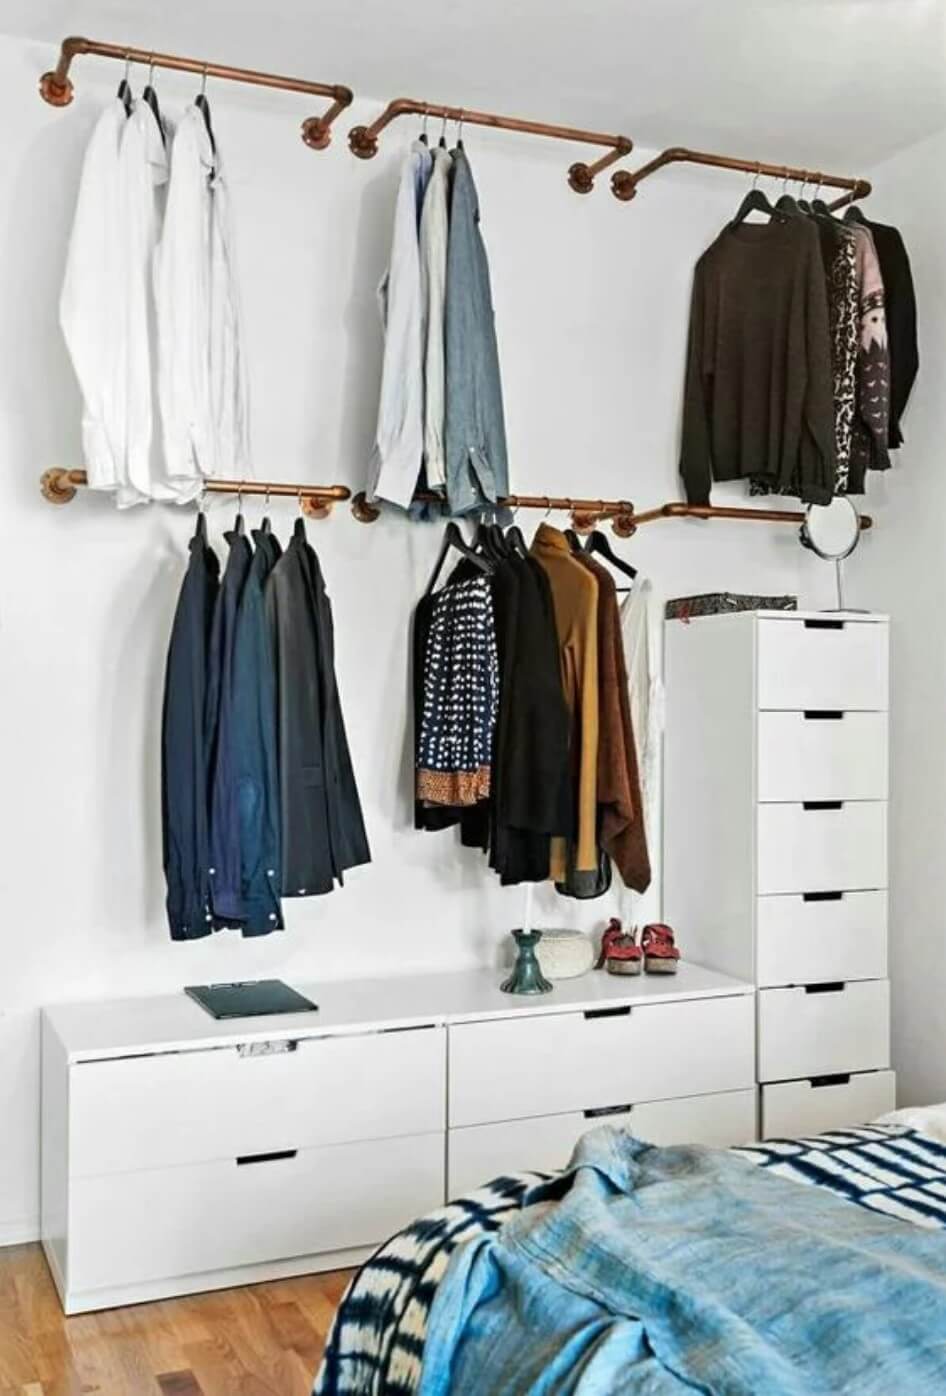 Wardrobe made with small wooden pipes and fixed drawers